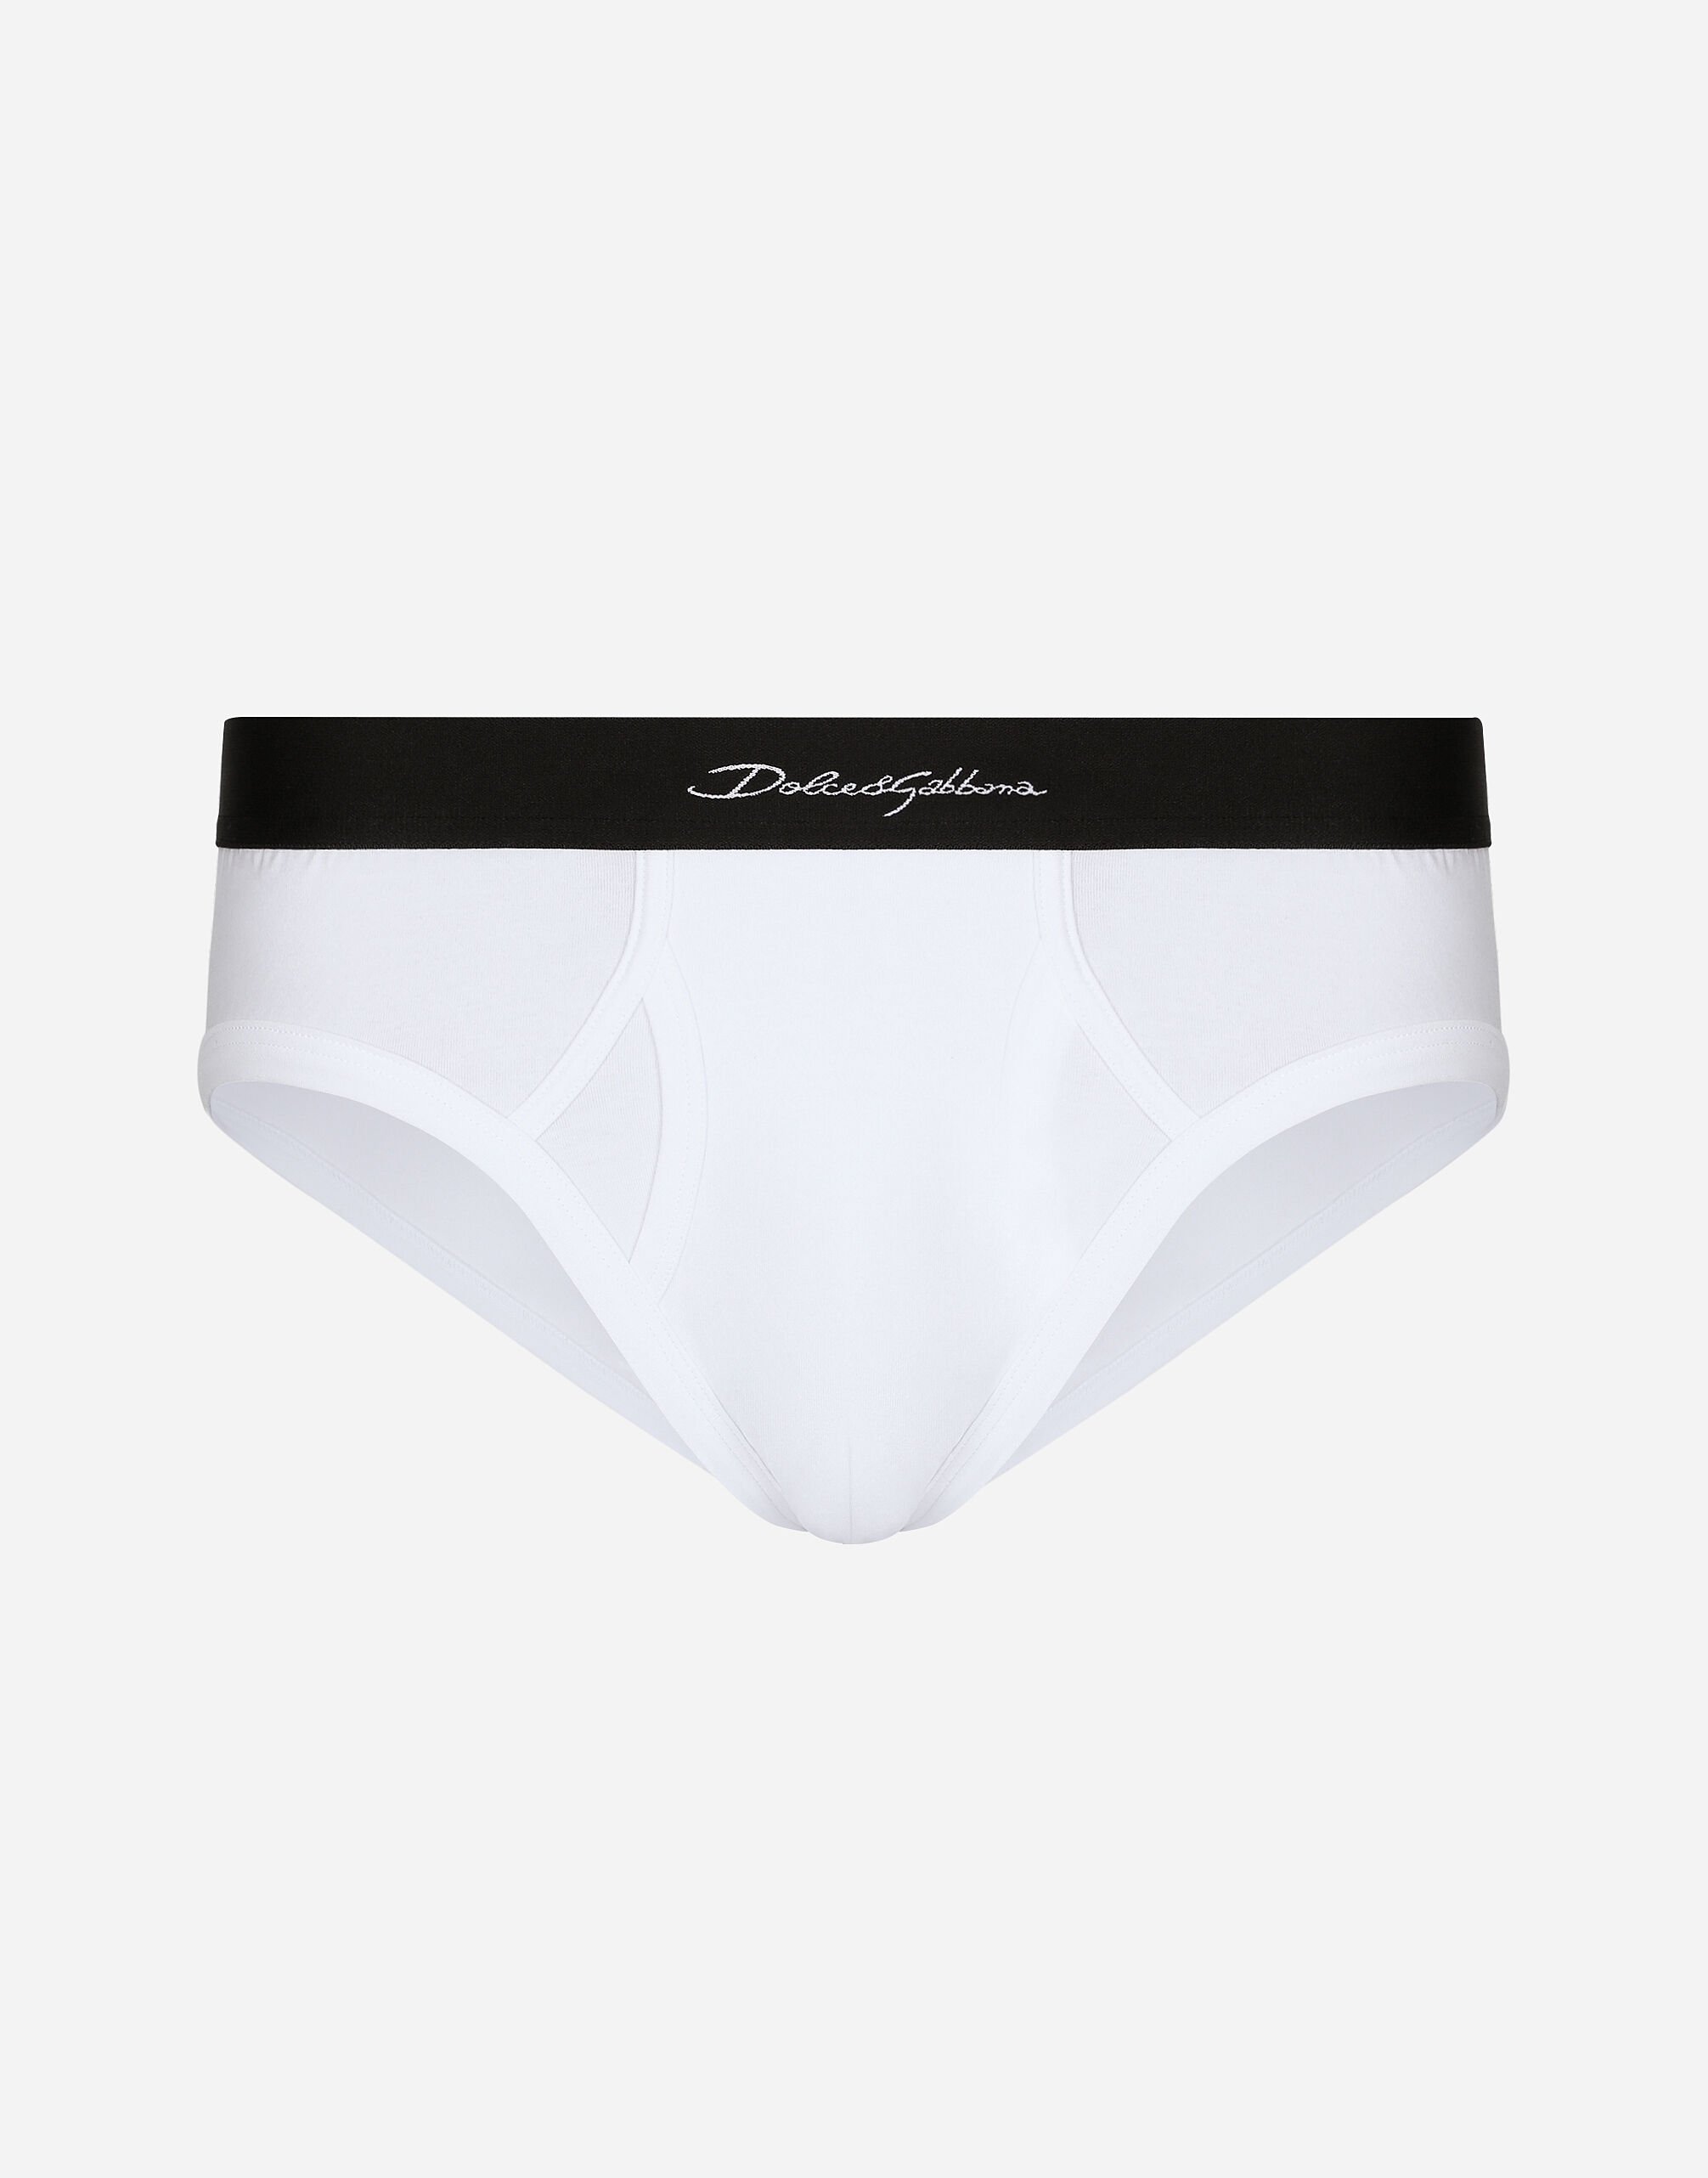 Dolce & Gabbana Mid-rise briefs in two-way stretch cotton jersey Multicolor G9BBZDG8LM4